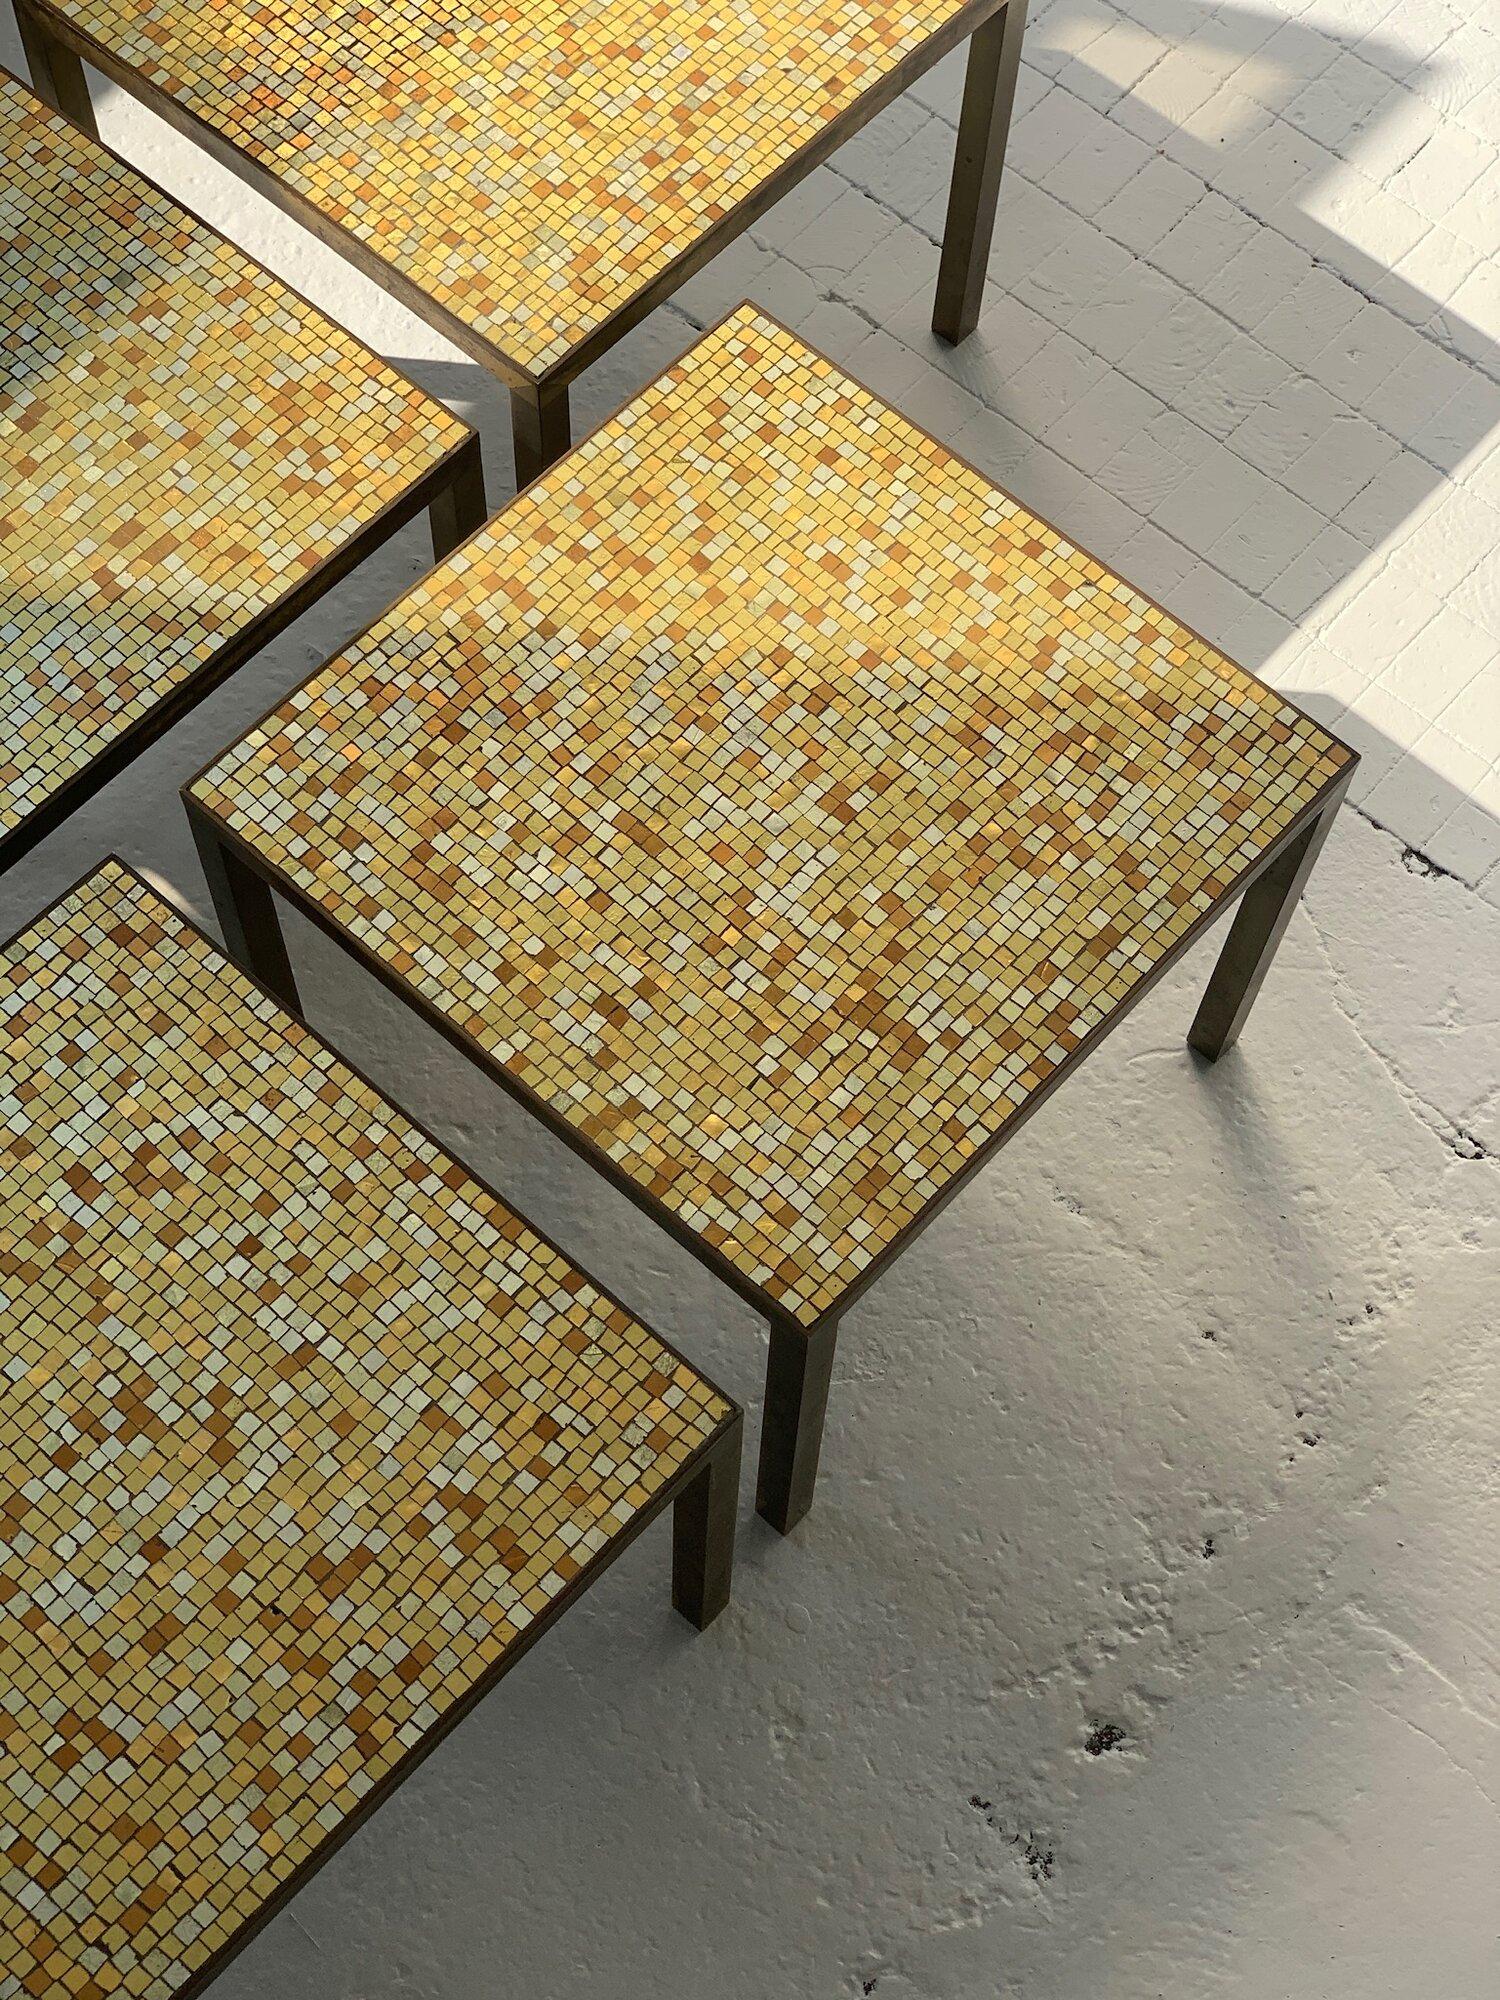 Rare Vintage Hollywood Regency Brass Frame and Glass Metallic Mosaic Tile Tables For Sale 1